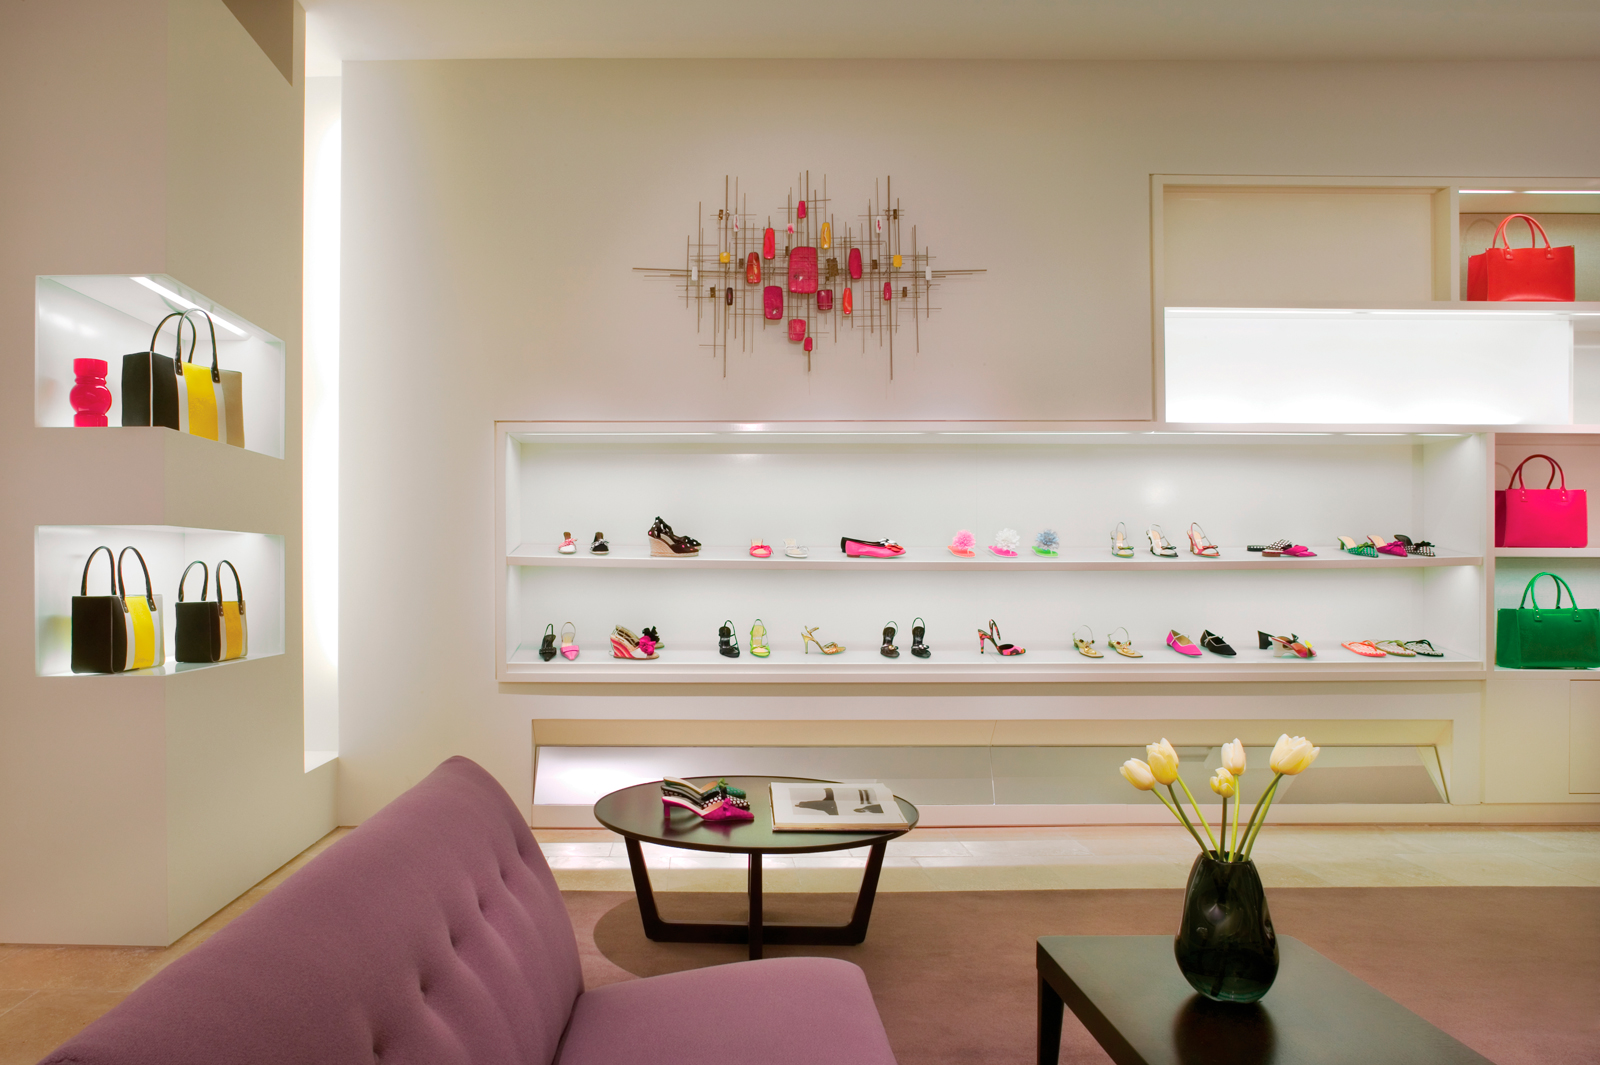 Kate Spade Stores Worldwide - Marvel Architects